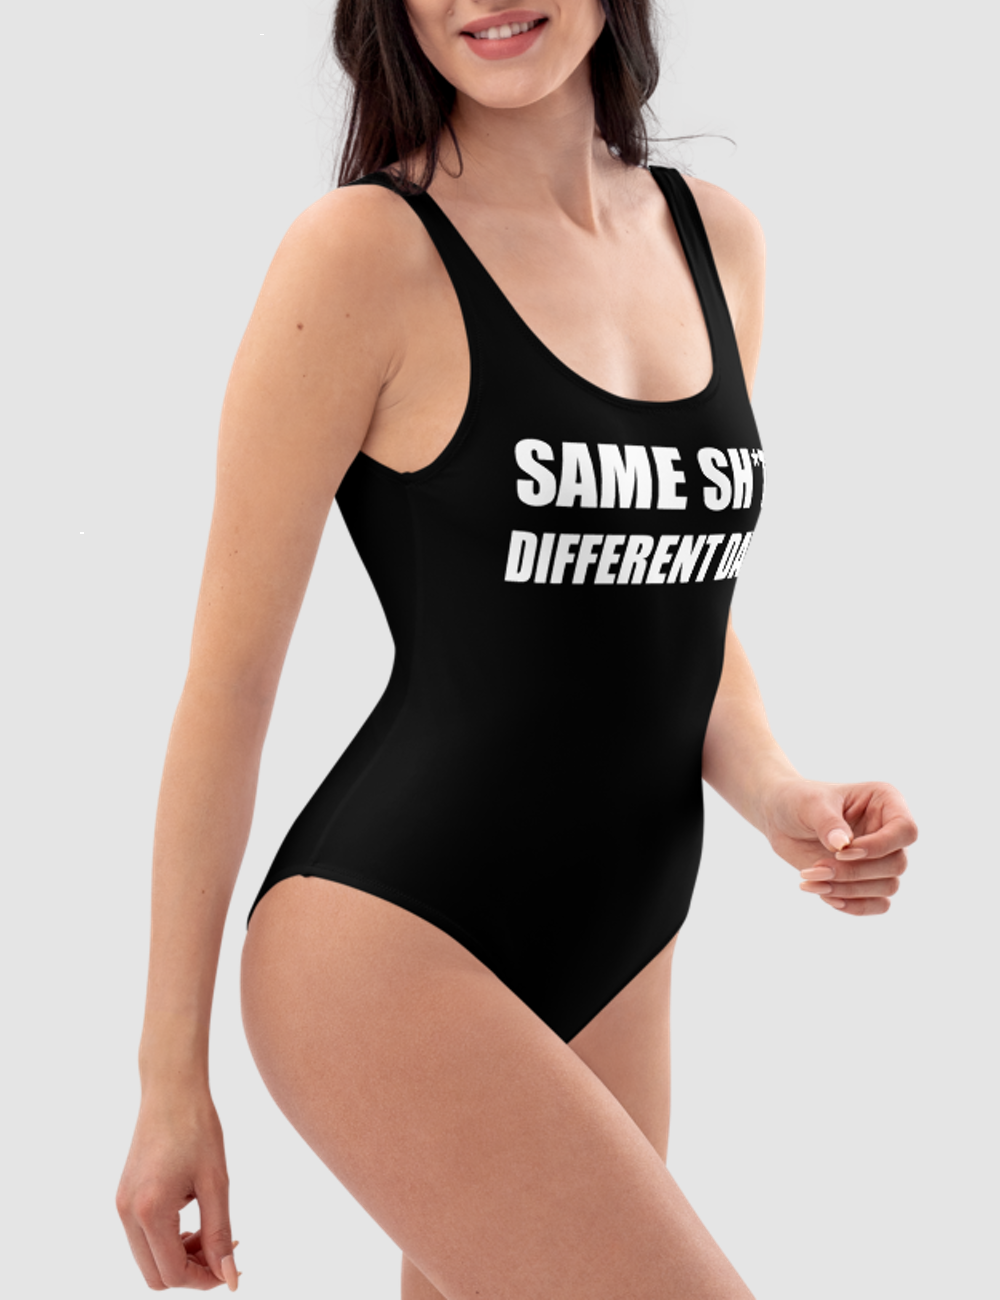 Same Sh*t Different Day | Women's One-Piece Swimsuit OniTakai